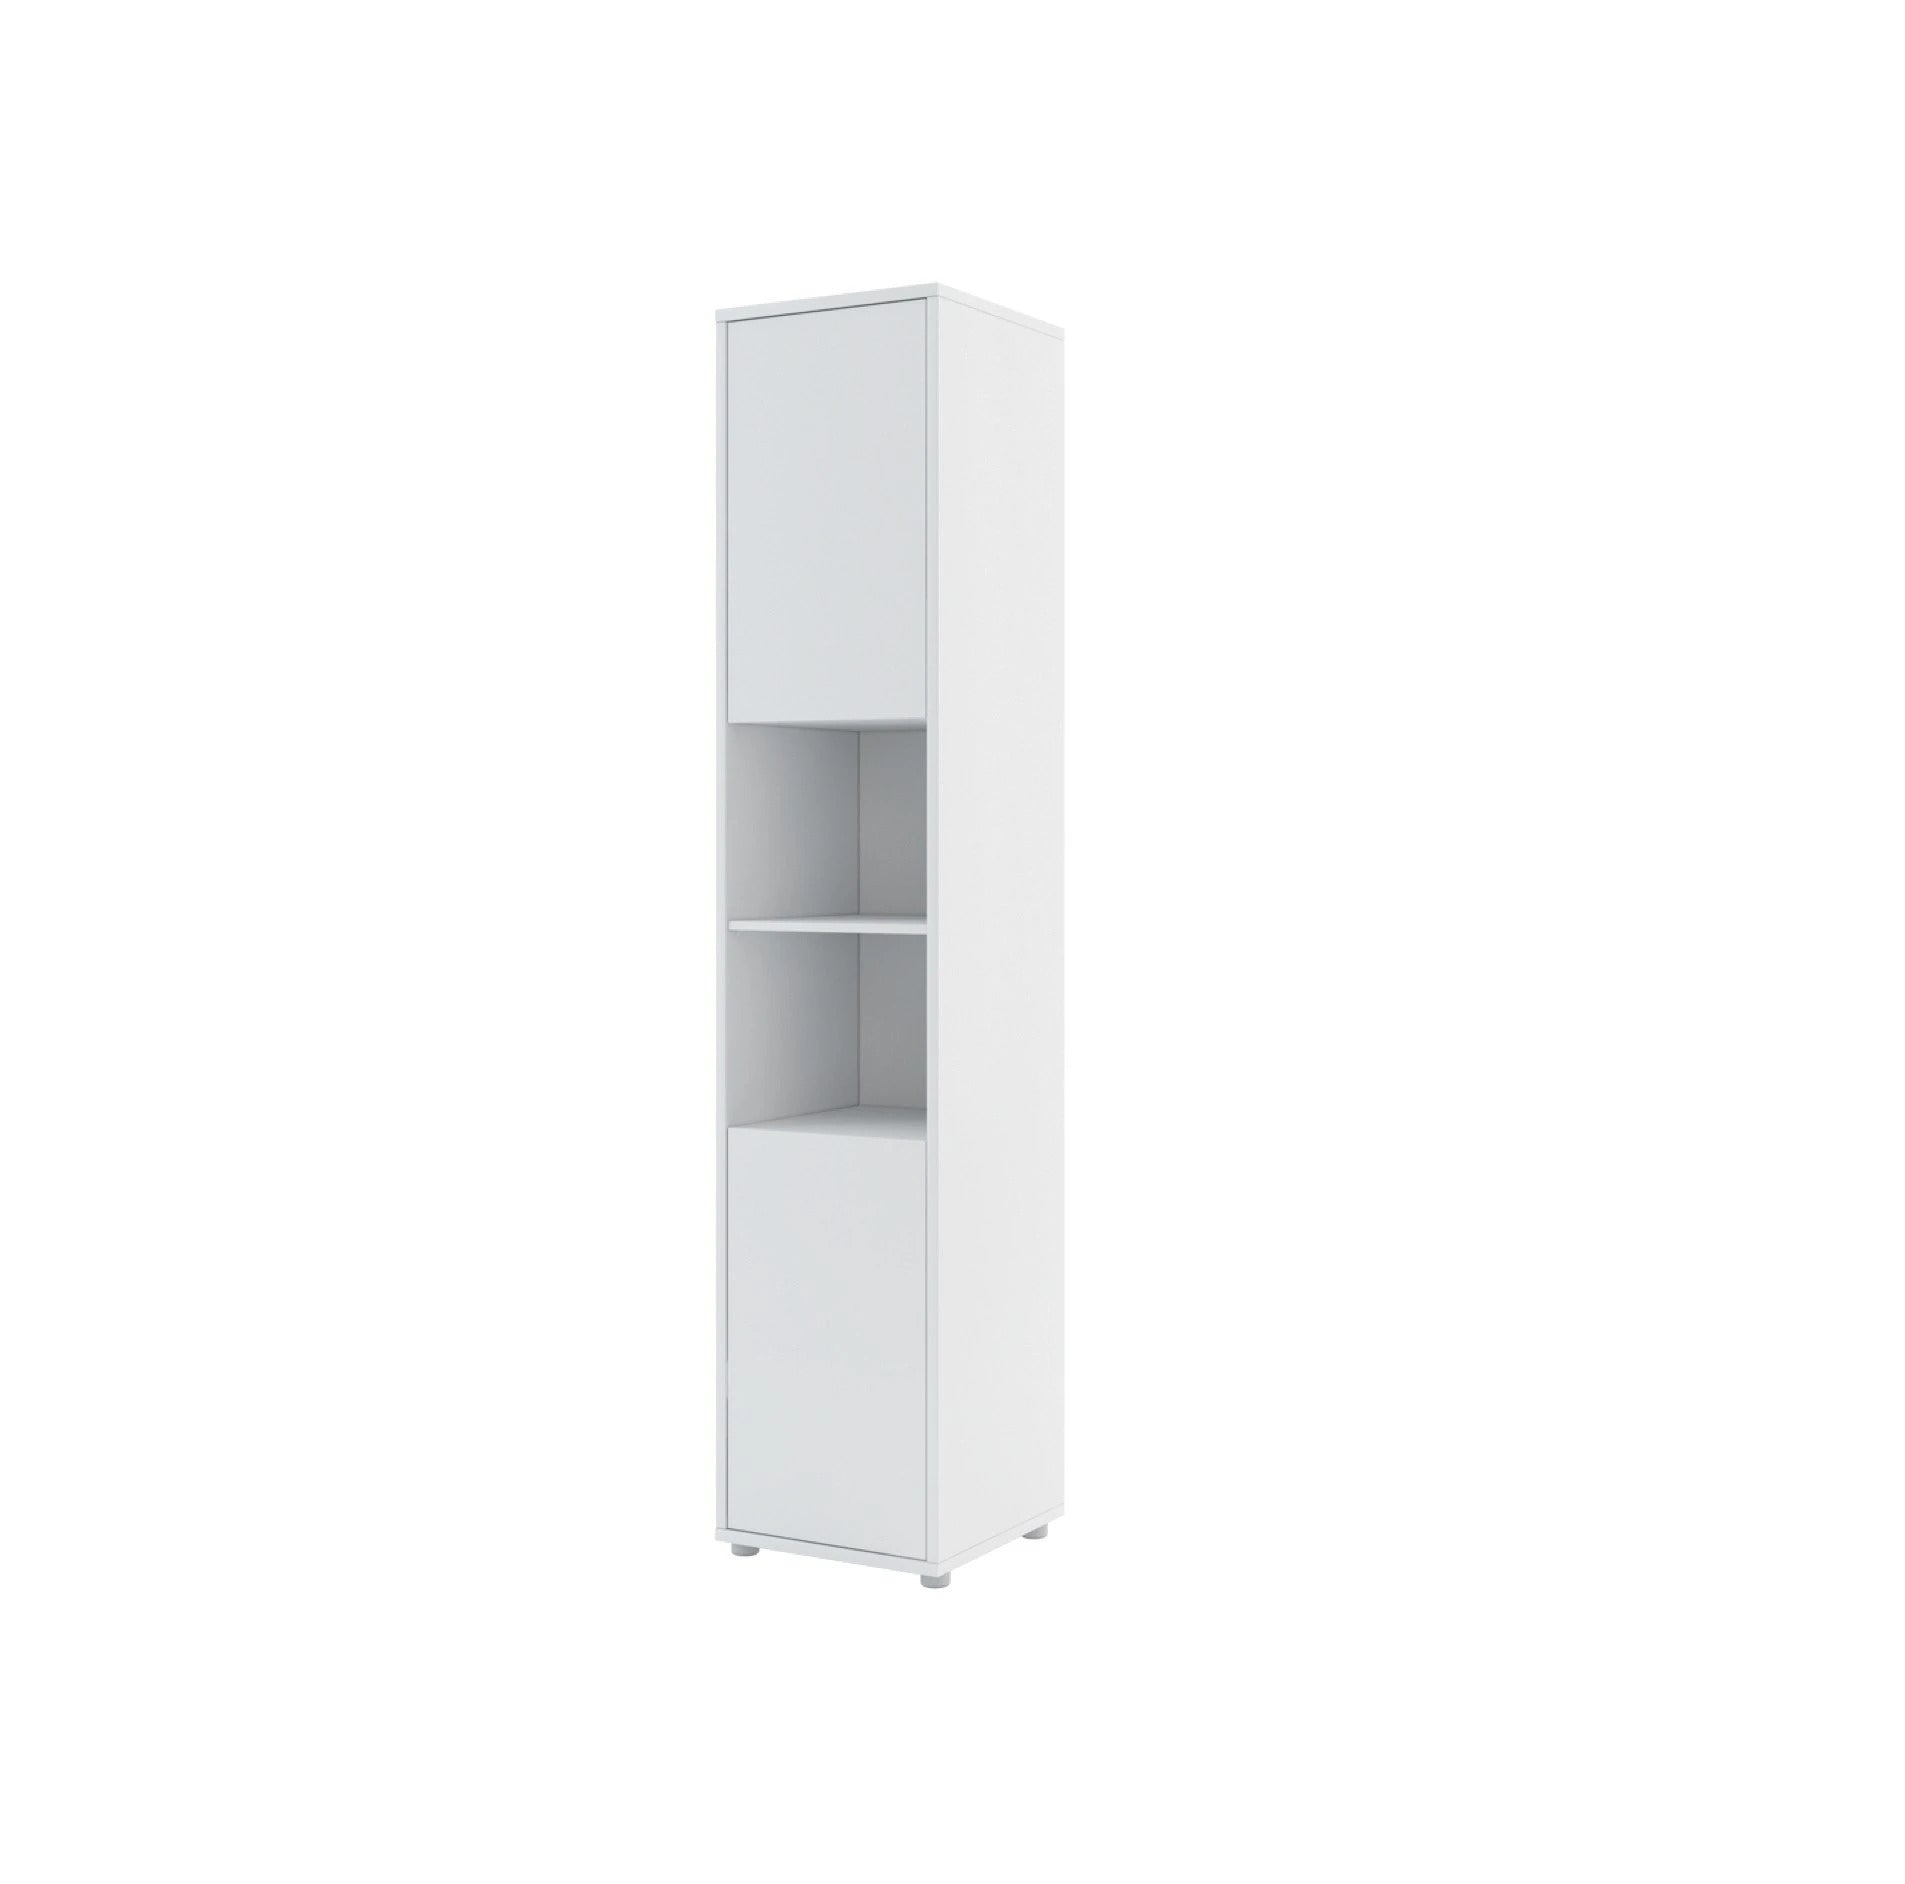 View BC08 Tall Storage Cabinet for Vertical Wall Bed Murphy Bed Concept White Matt 45cm information